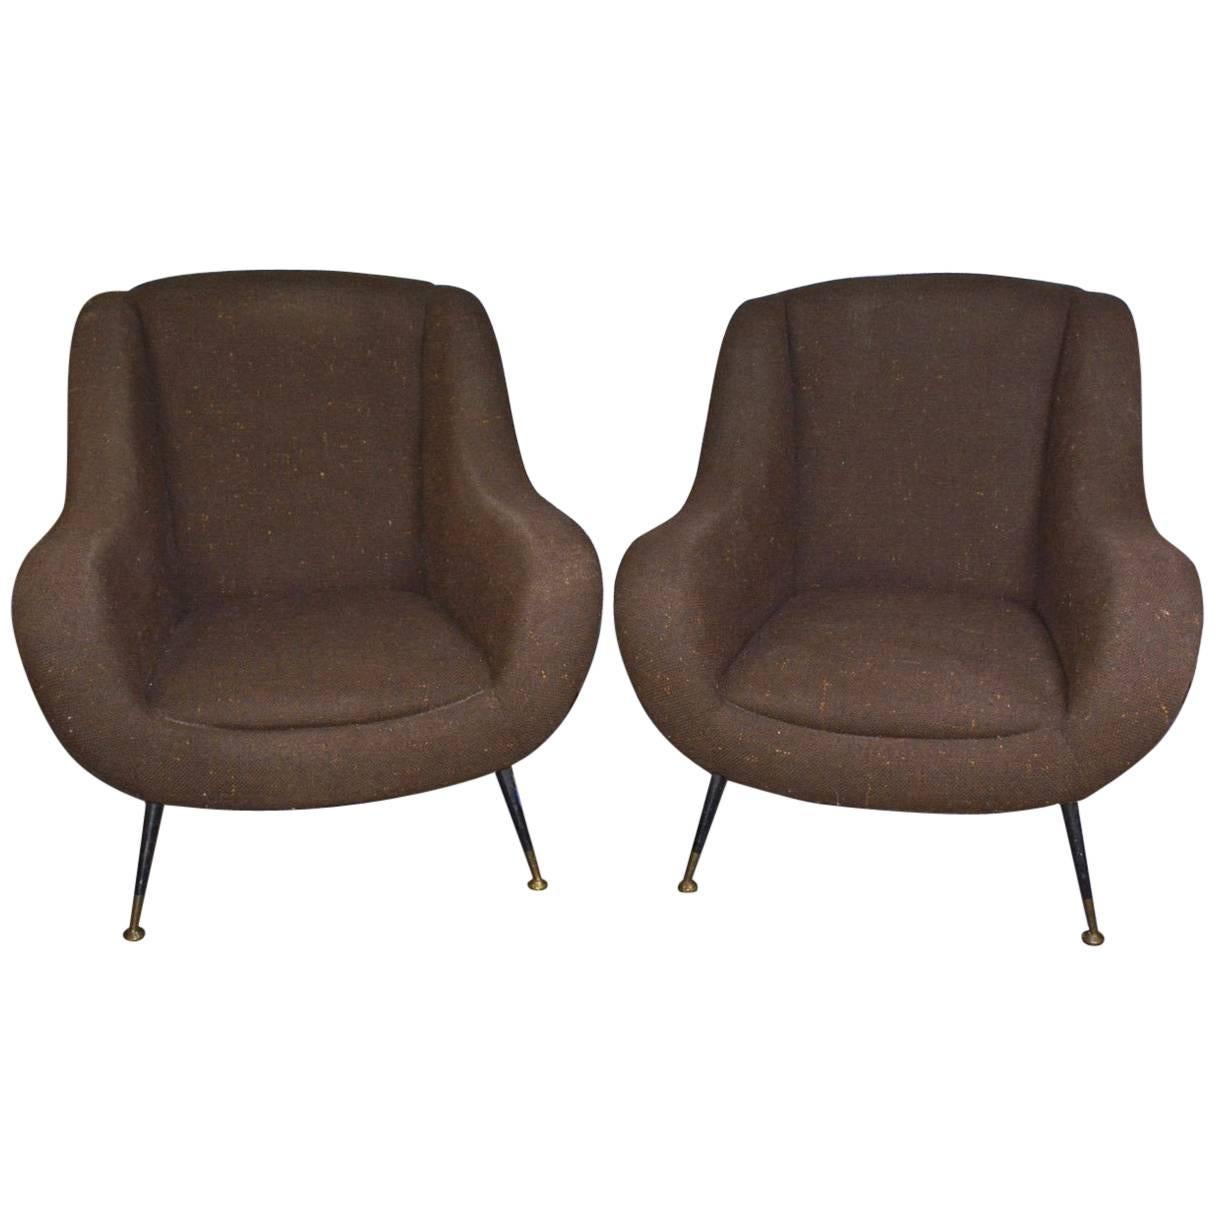 Pair of Italian Upholstered Club Chairs